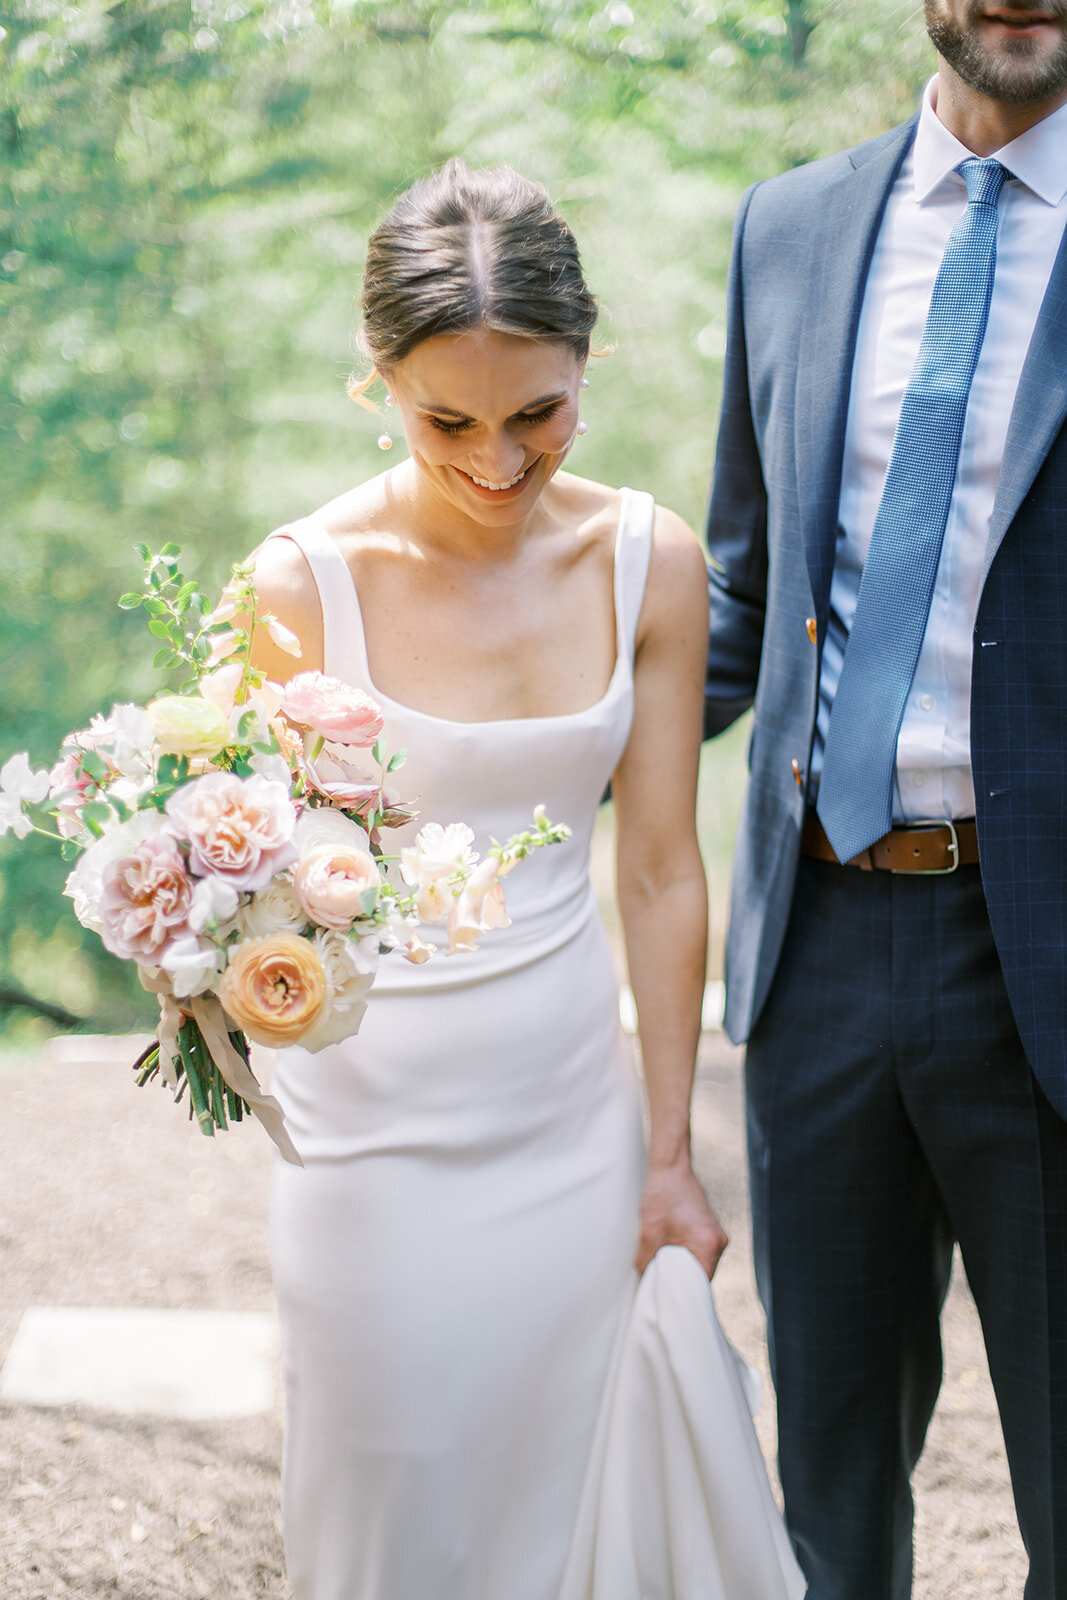 Kate Campbell Floral Pool Ceremony Wedding June 2022 by Megan Harris Photography134